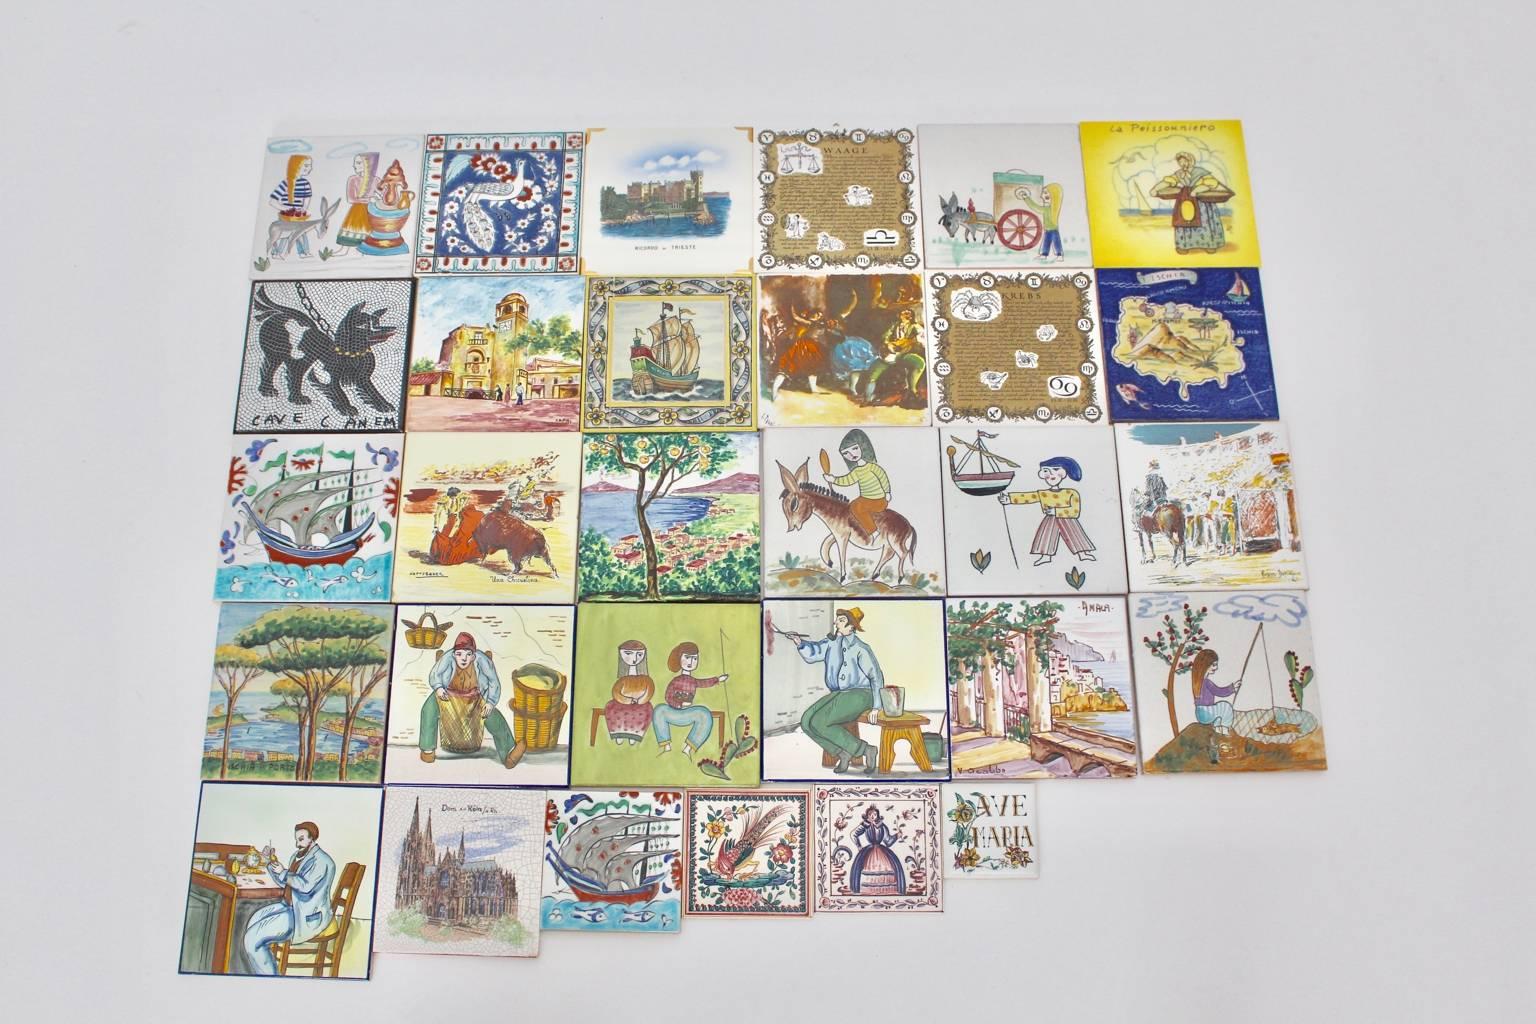 The collection of ceramic tiles includes 30 pieces of multicolored ceramic tiles from the 1960s.
The tiles were collected in Greece, Italy, Spain, Madeira and Portugal.

The ceramic tiles are partly signed and handmade.
The tiles were part of a